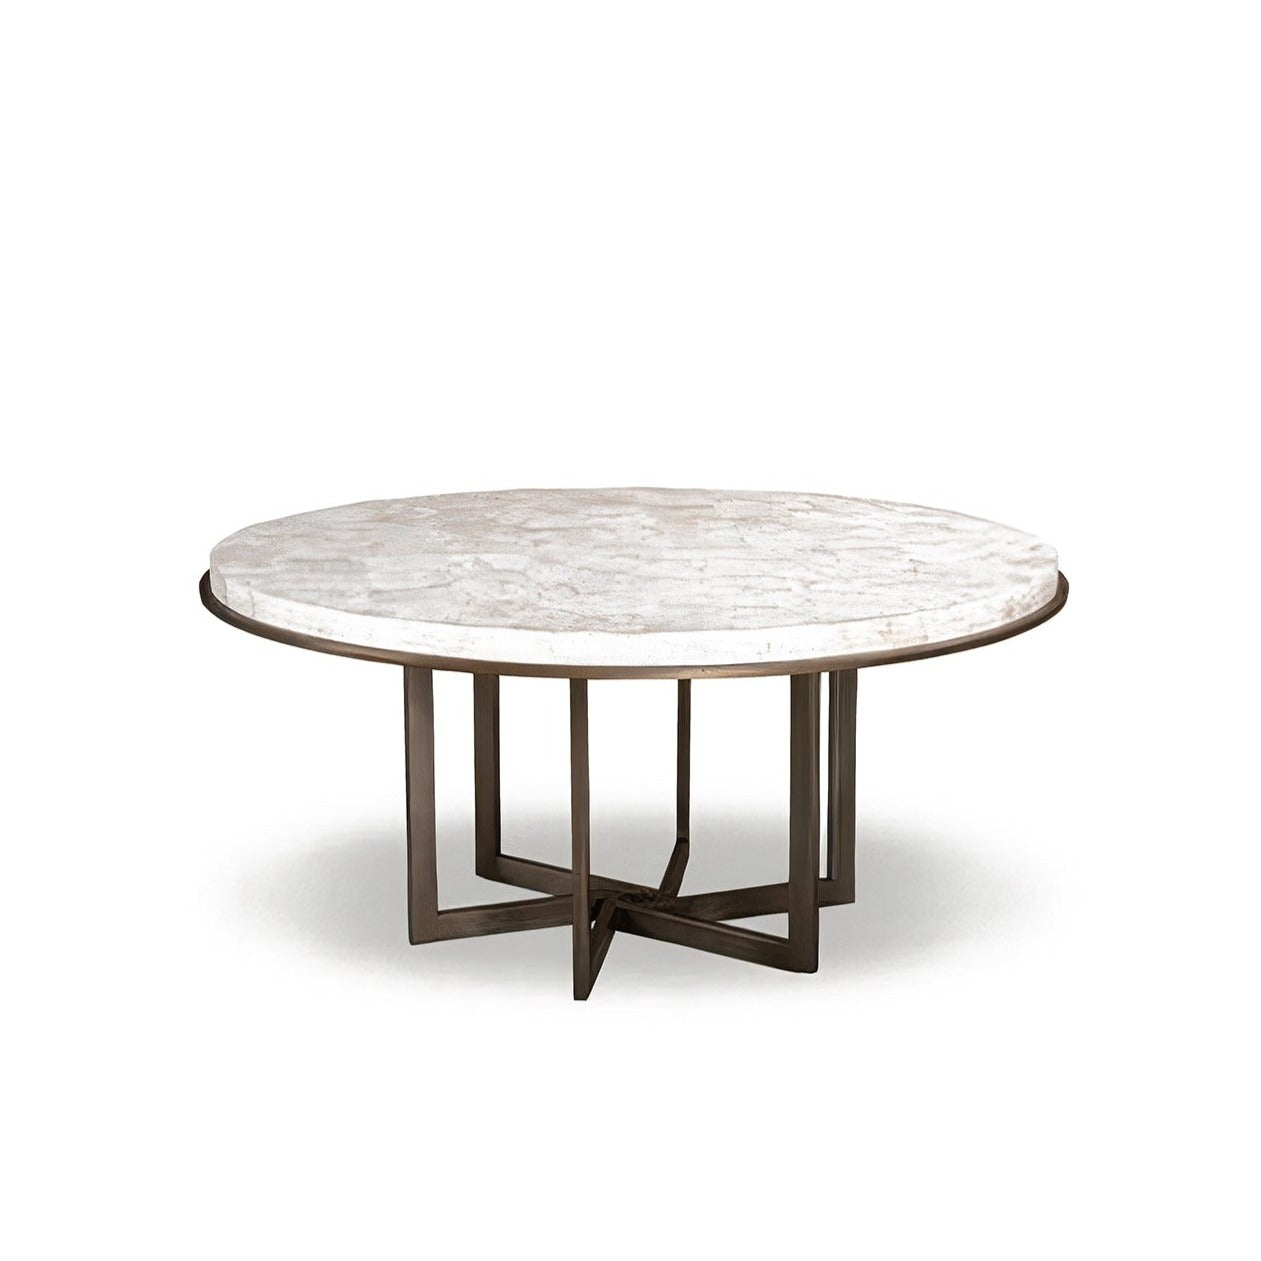 Bocel Round Dining Table